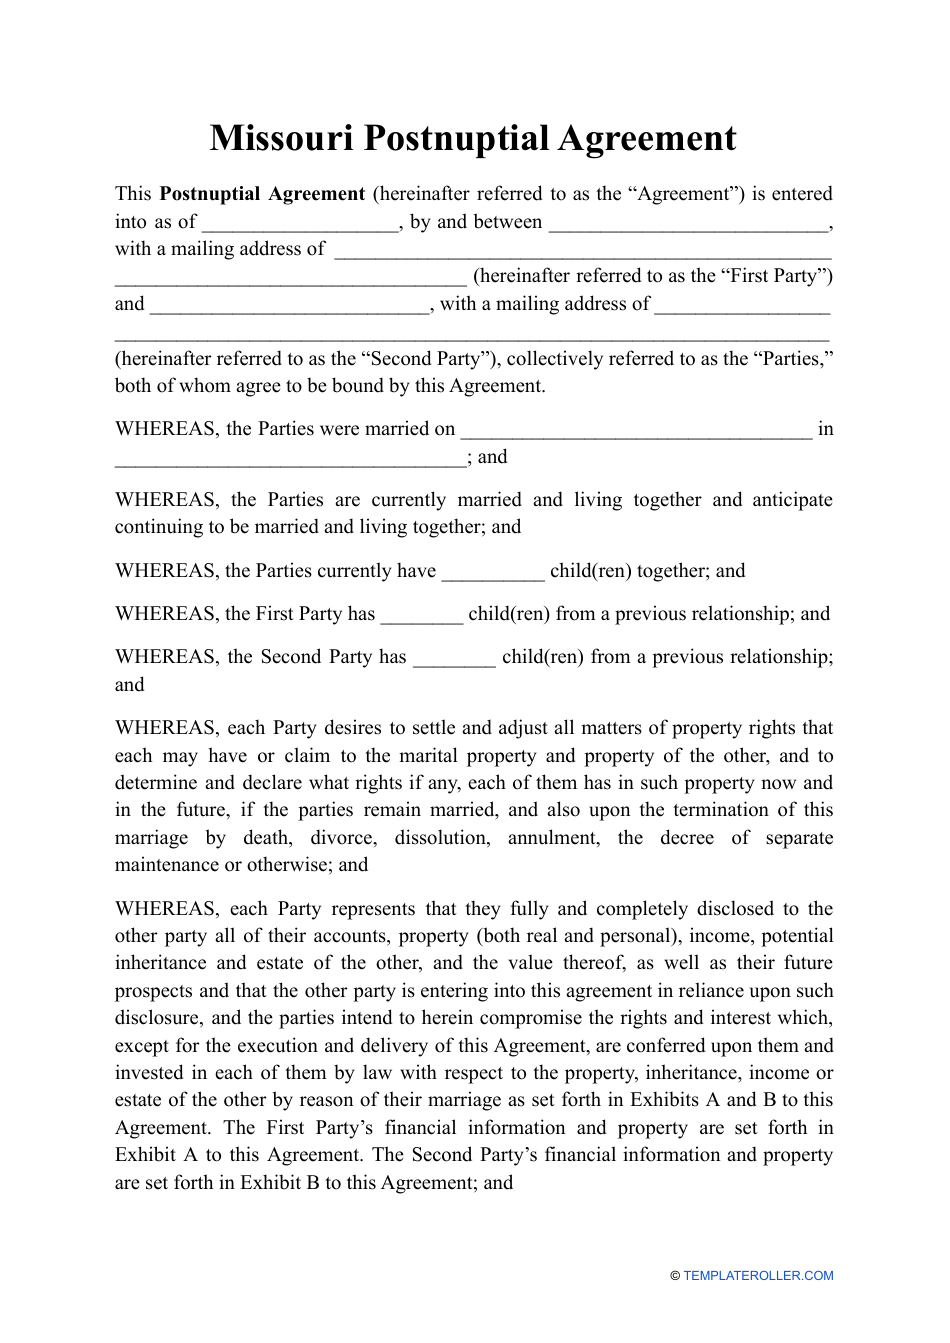 Postnuptial Agreement Template - Missouri, Page 1